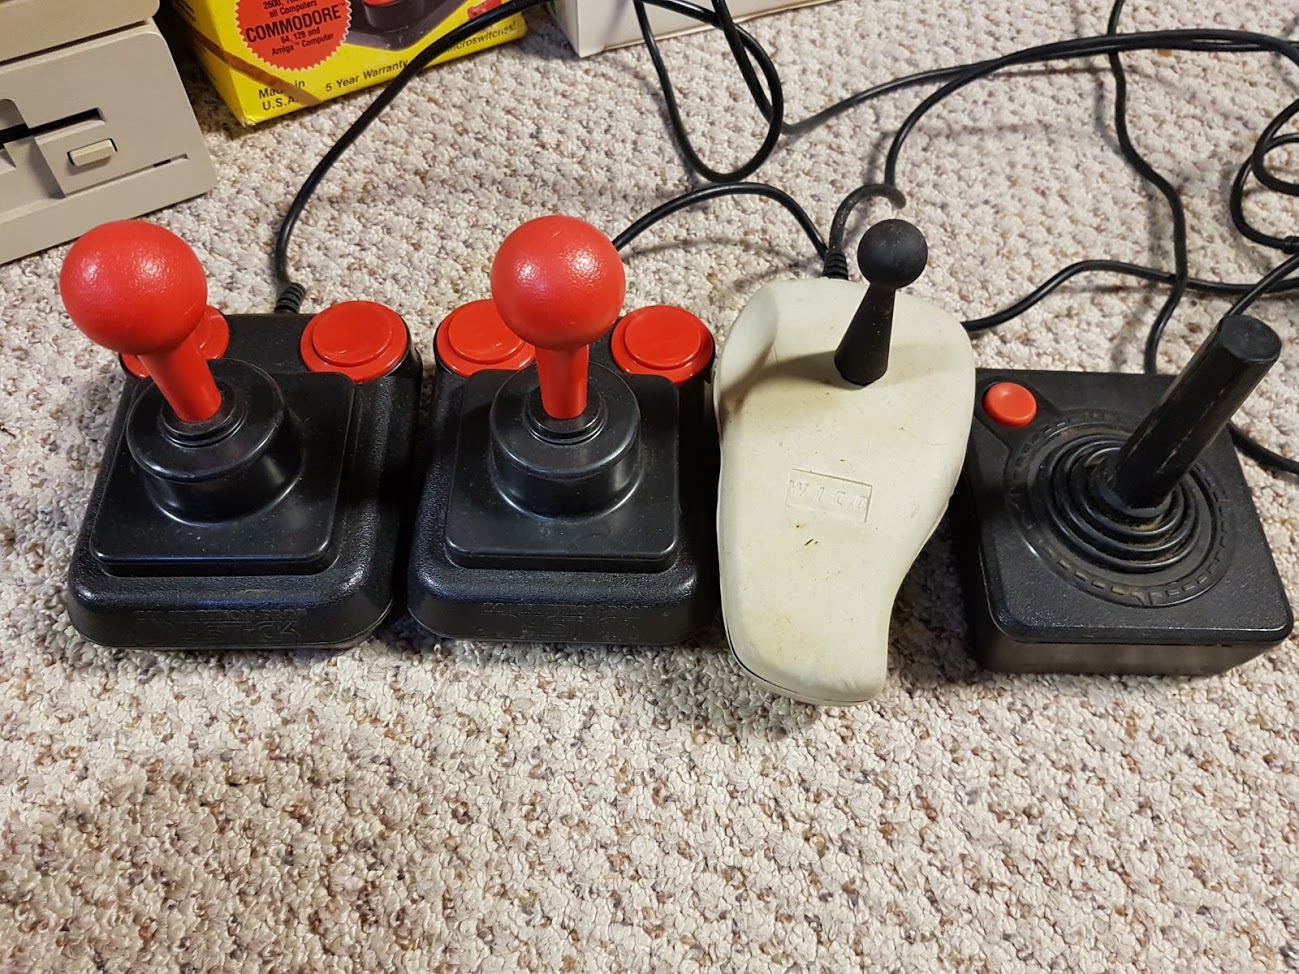 "These were just lose inside the box. I had the second from the right joystick here -- and it sucked. Cramped up my hand after playing for a little while."